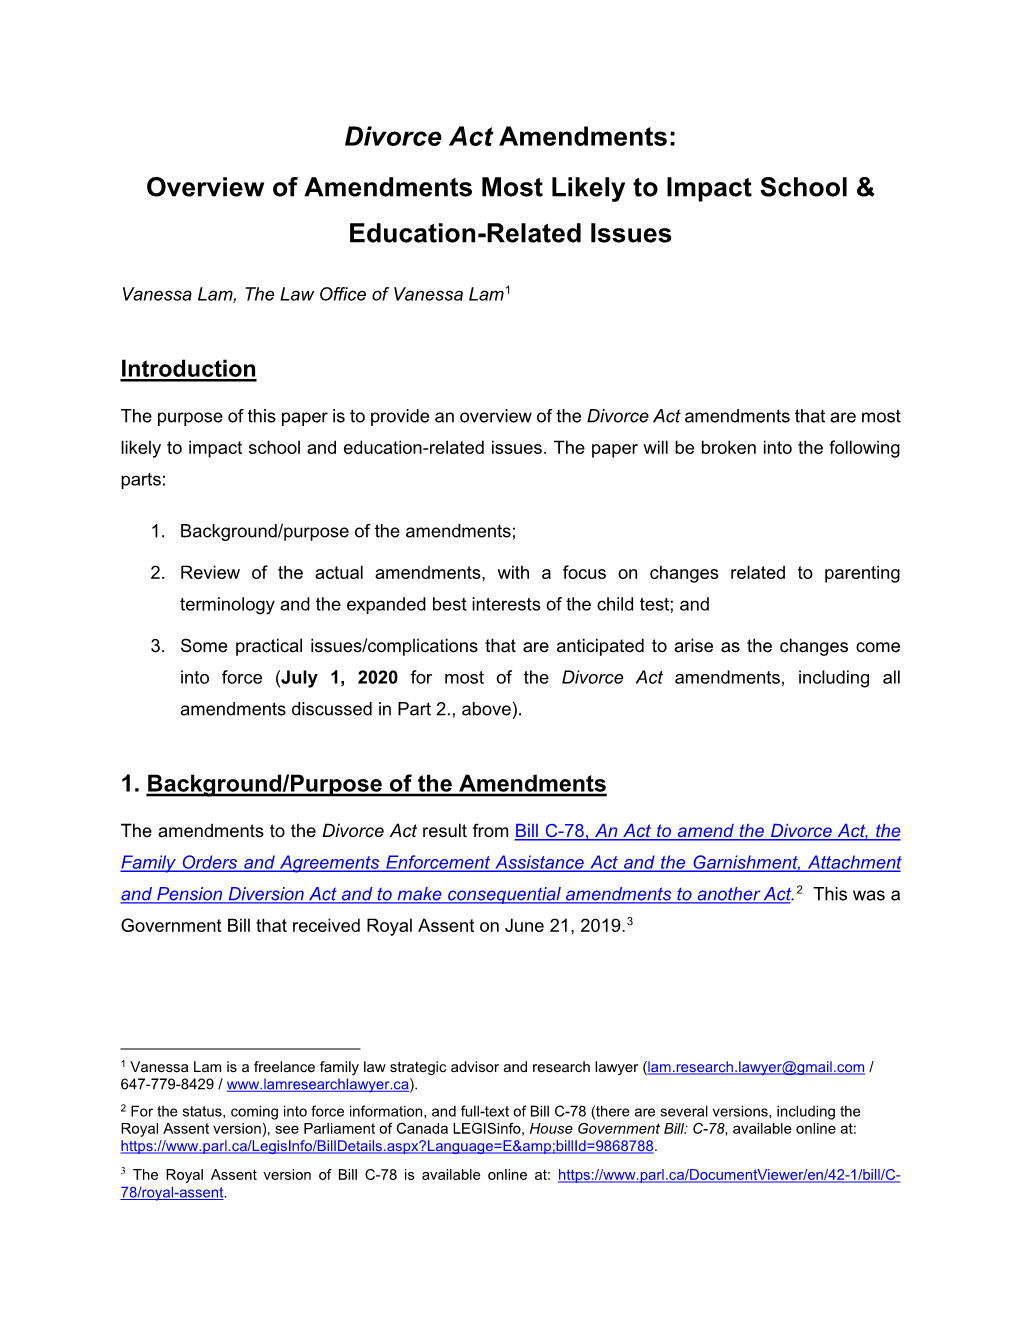 Divorce Act Amendments: Overview of Amendments Most Likely to Impact School & Education-Related Issues